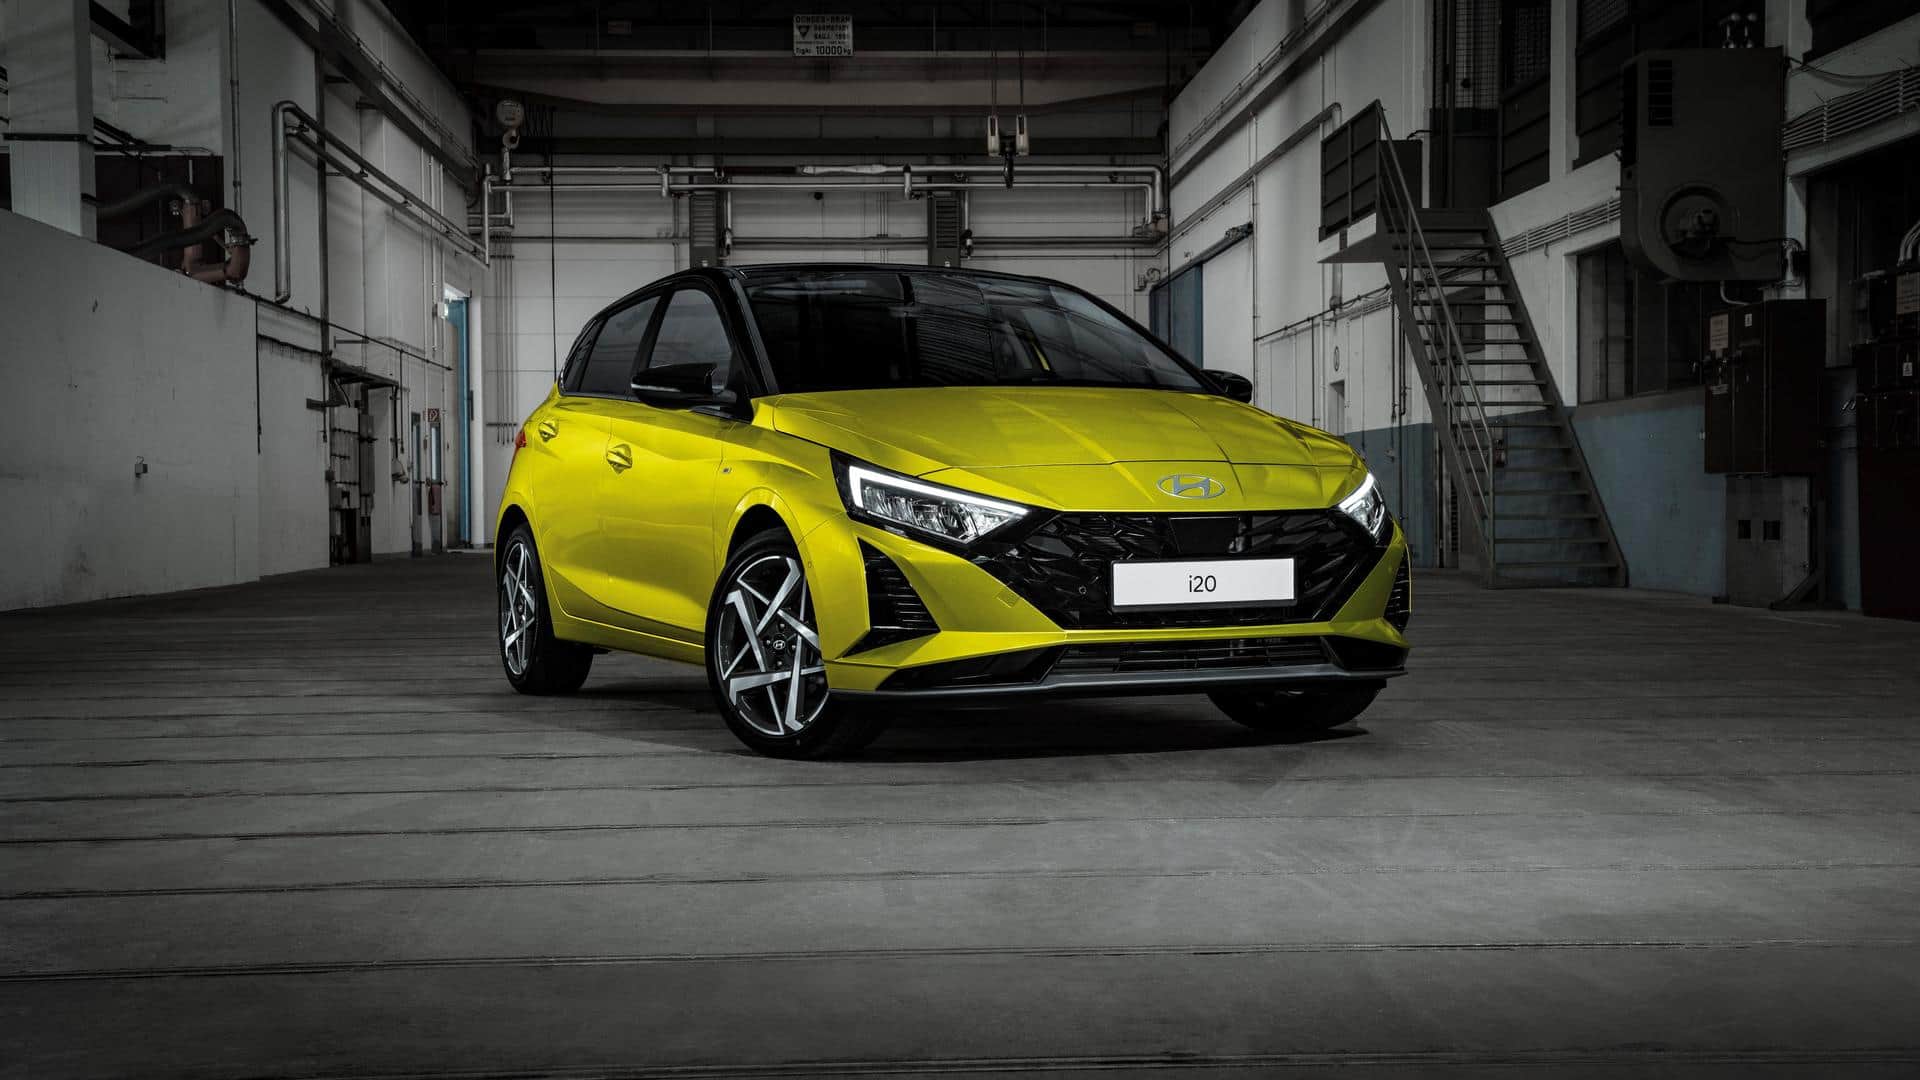 Hyundai refreshes i20 with MY-2023 upgrades: Check top features